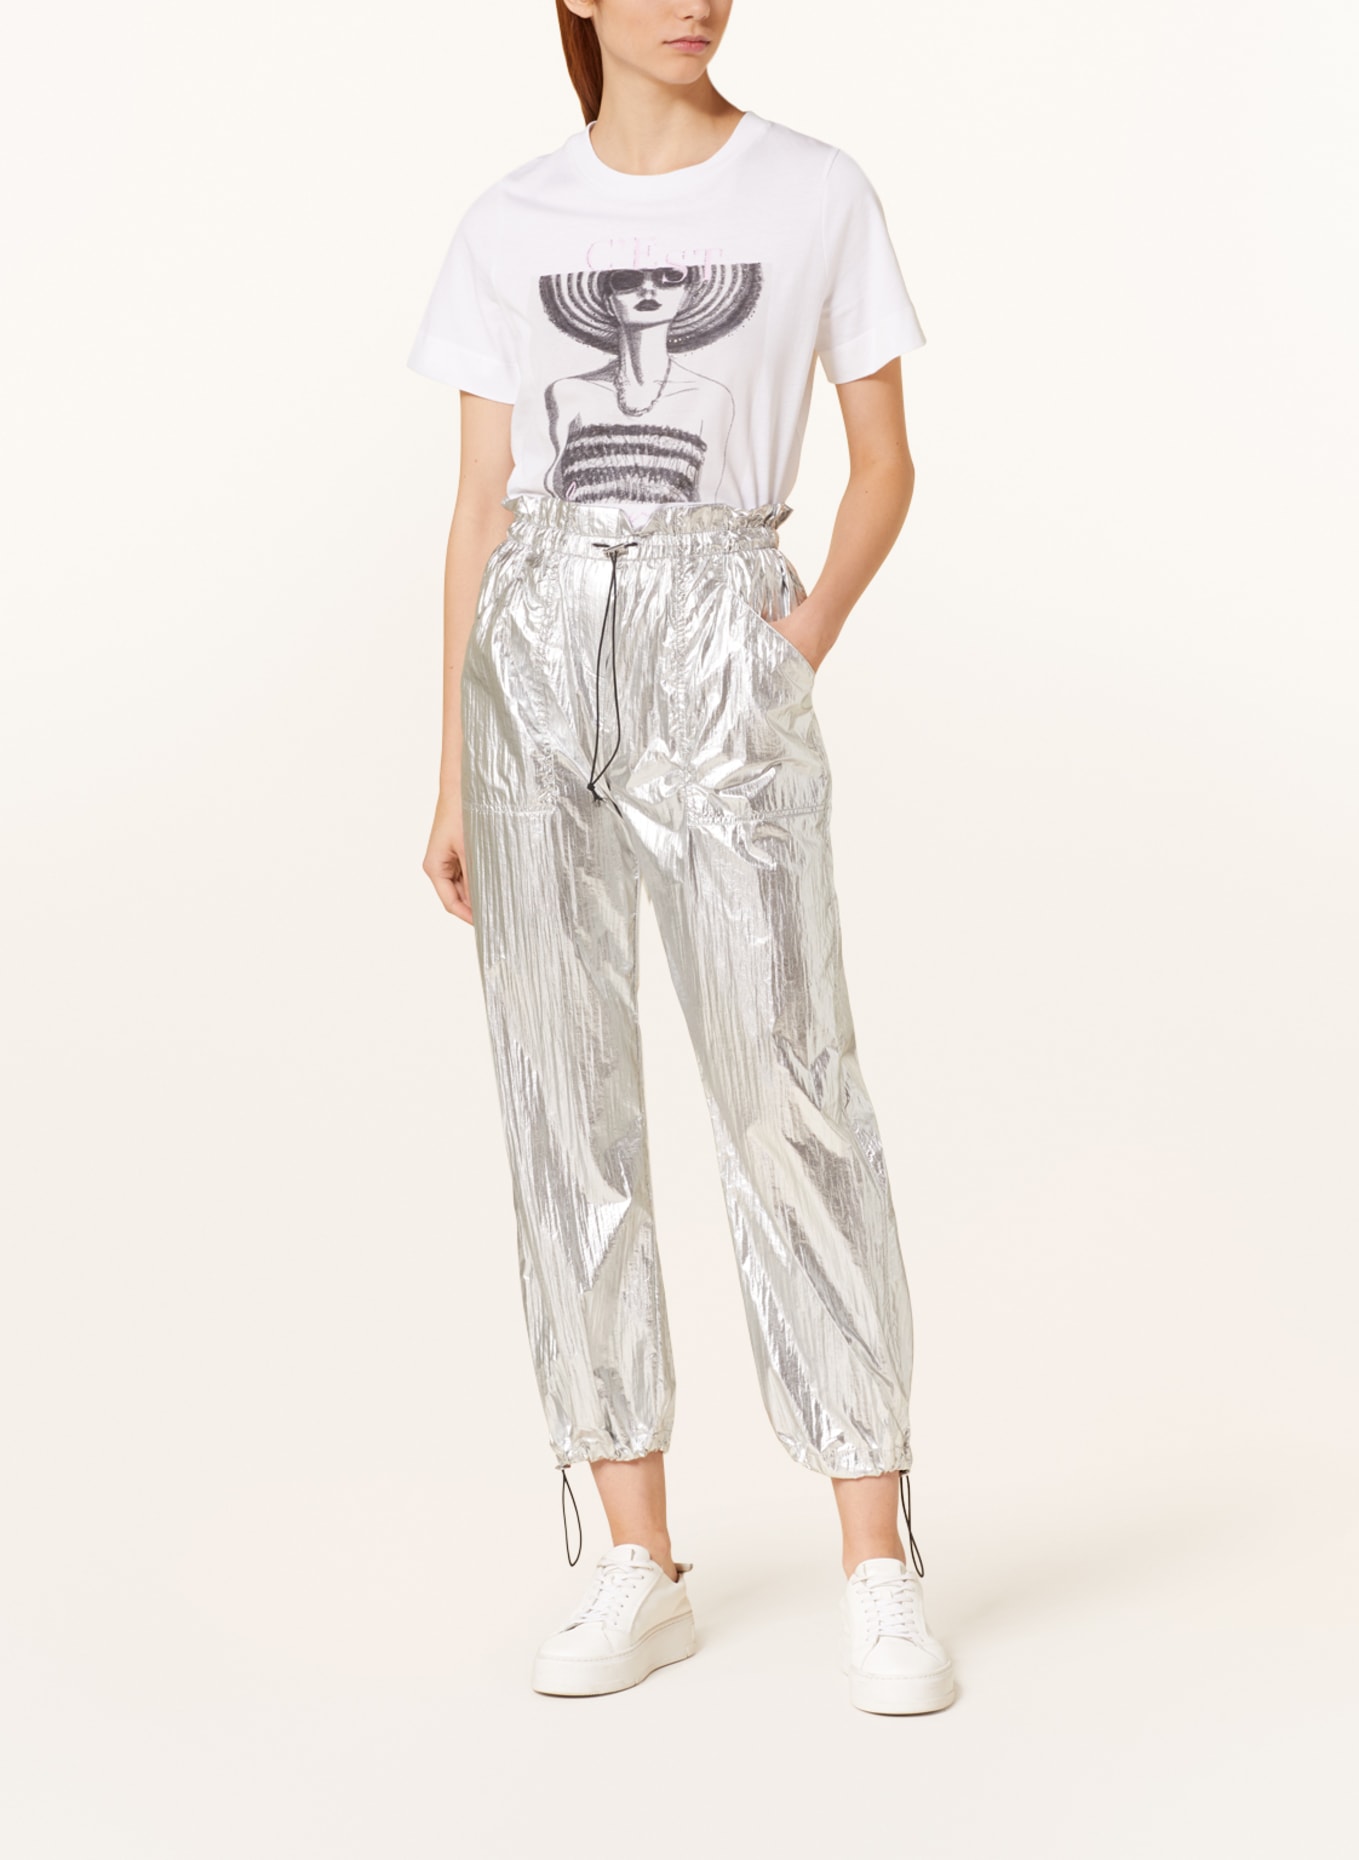 rich&royal Pants in jogger style, Color: SILVER (Image 2)